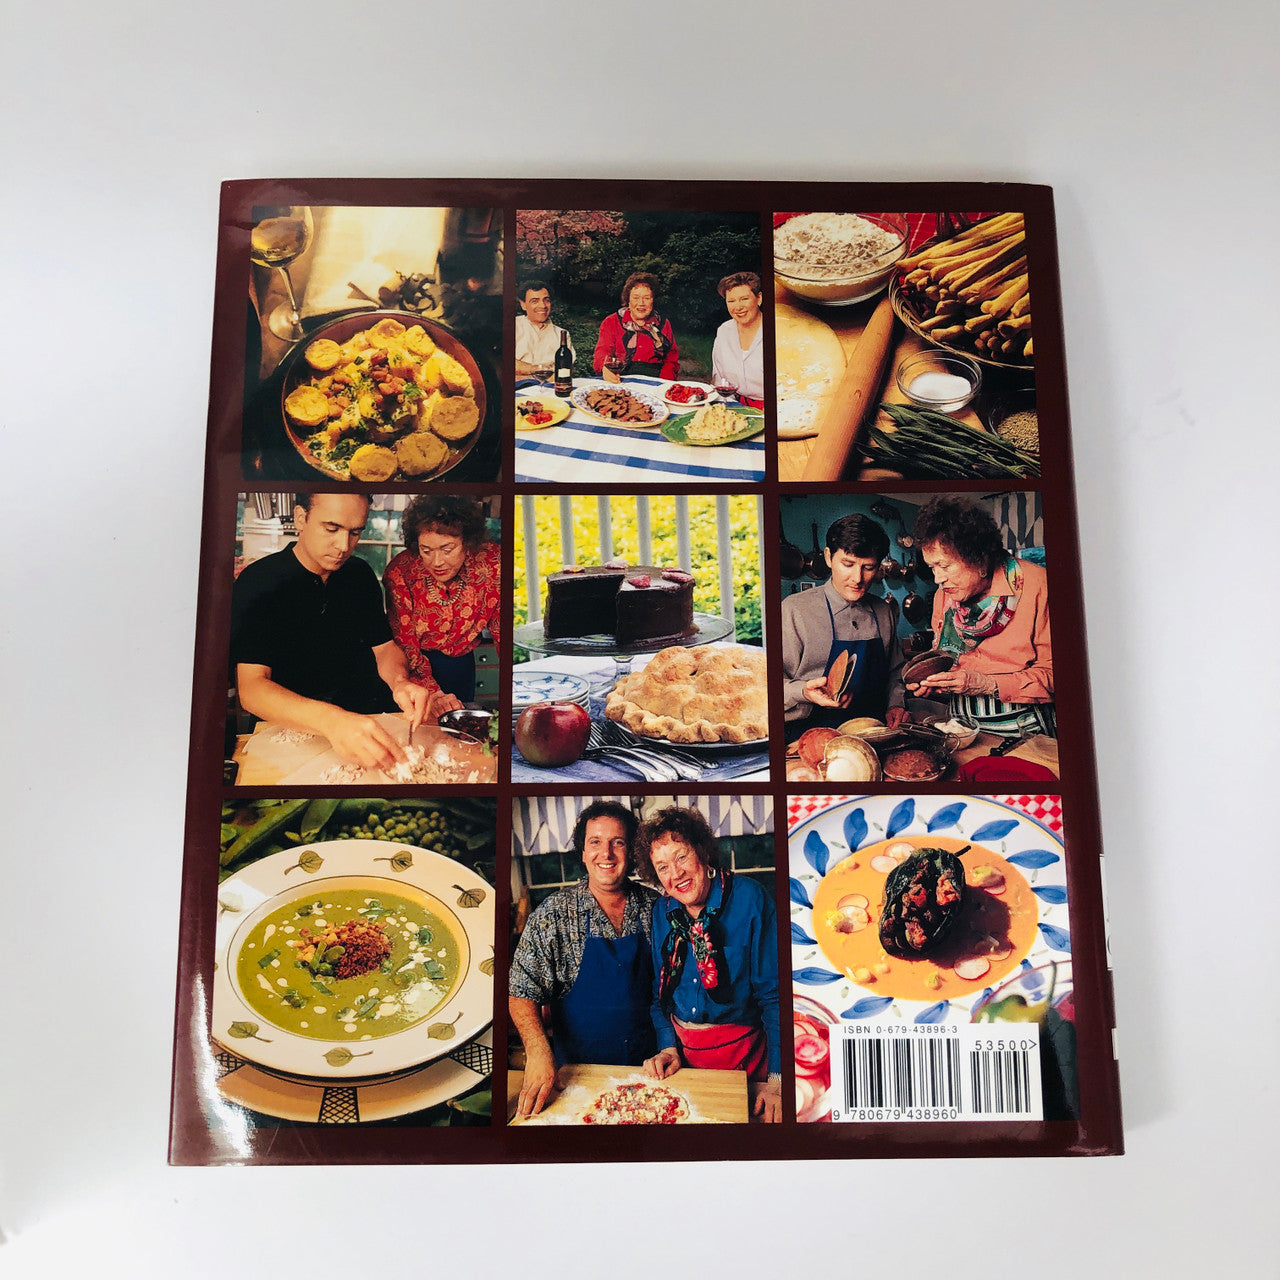 Julia Child, In Julia Child's Kitchen with Master Chefs, with Nancy Verde Barr, Alfred A Knopf, First Edition, 1995, Cookbook, Cook Book